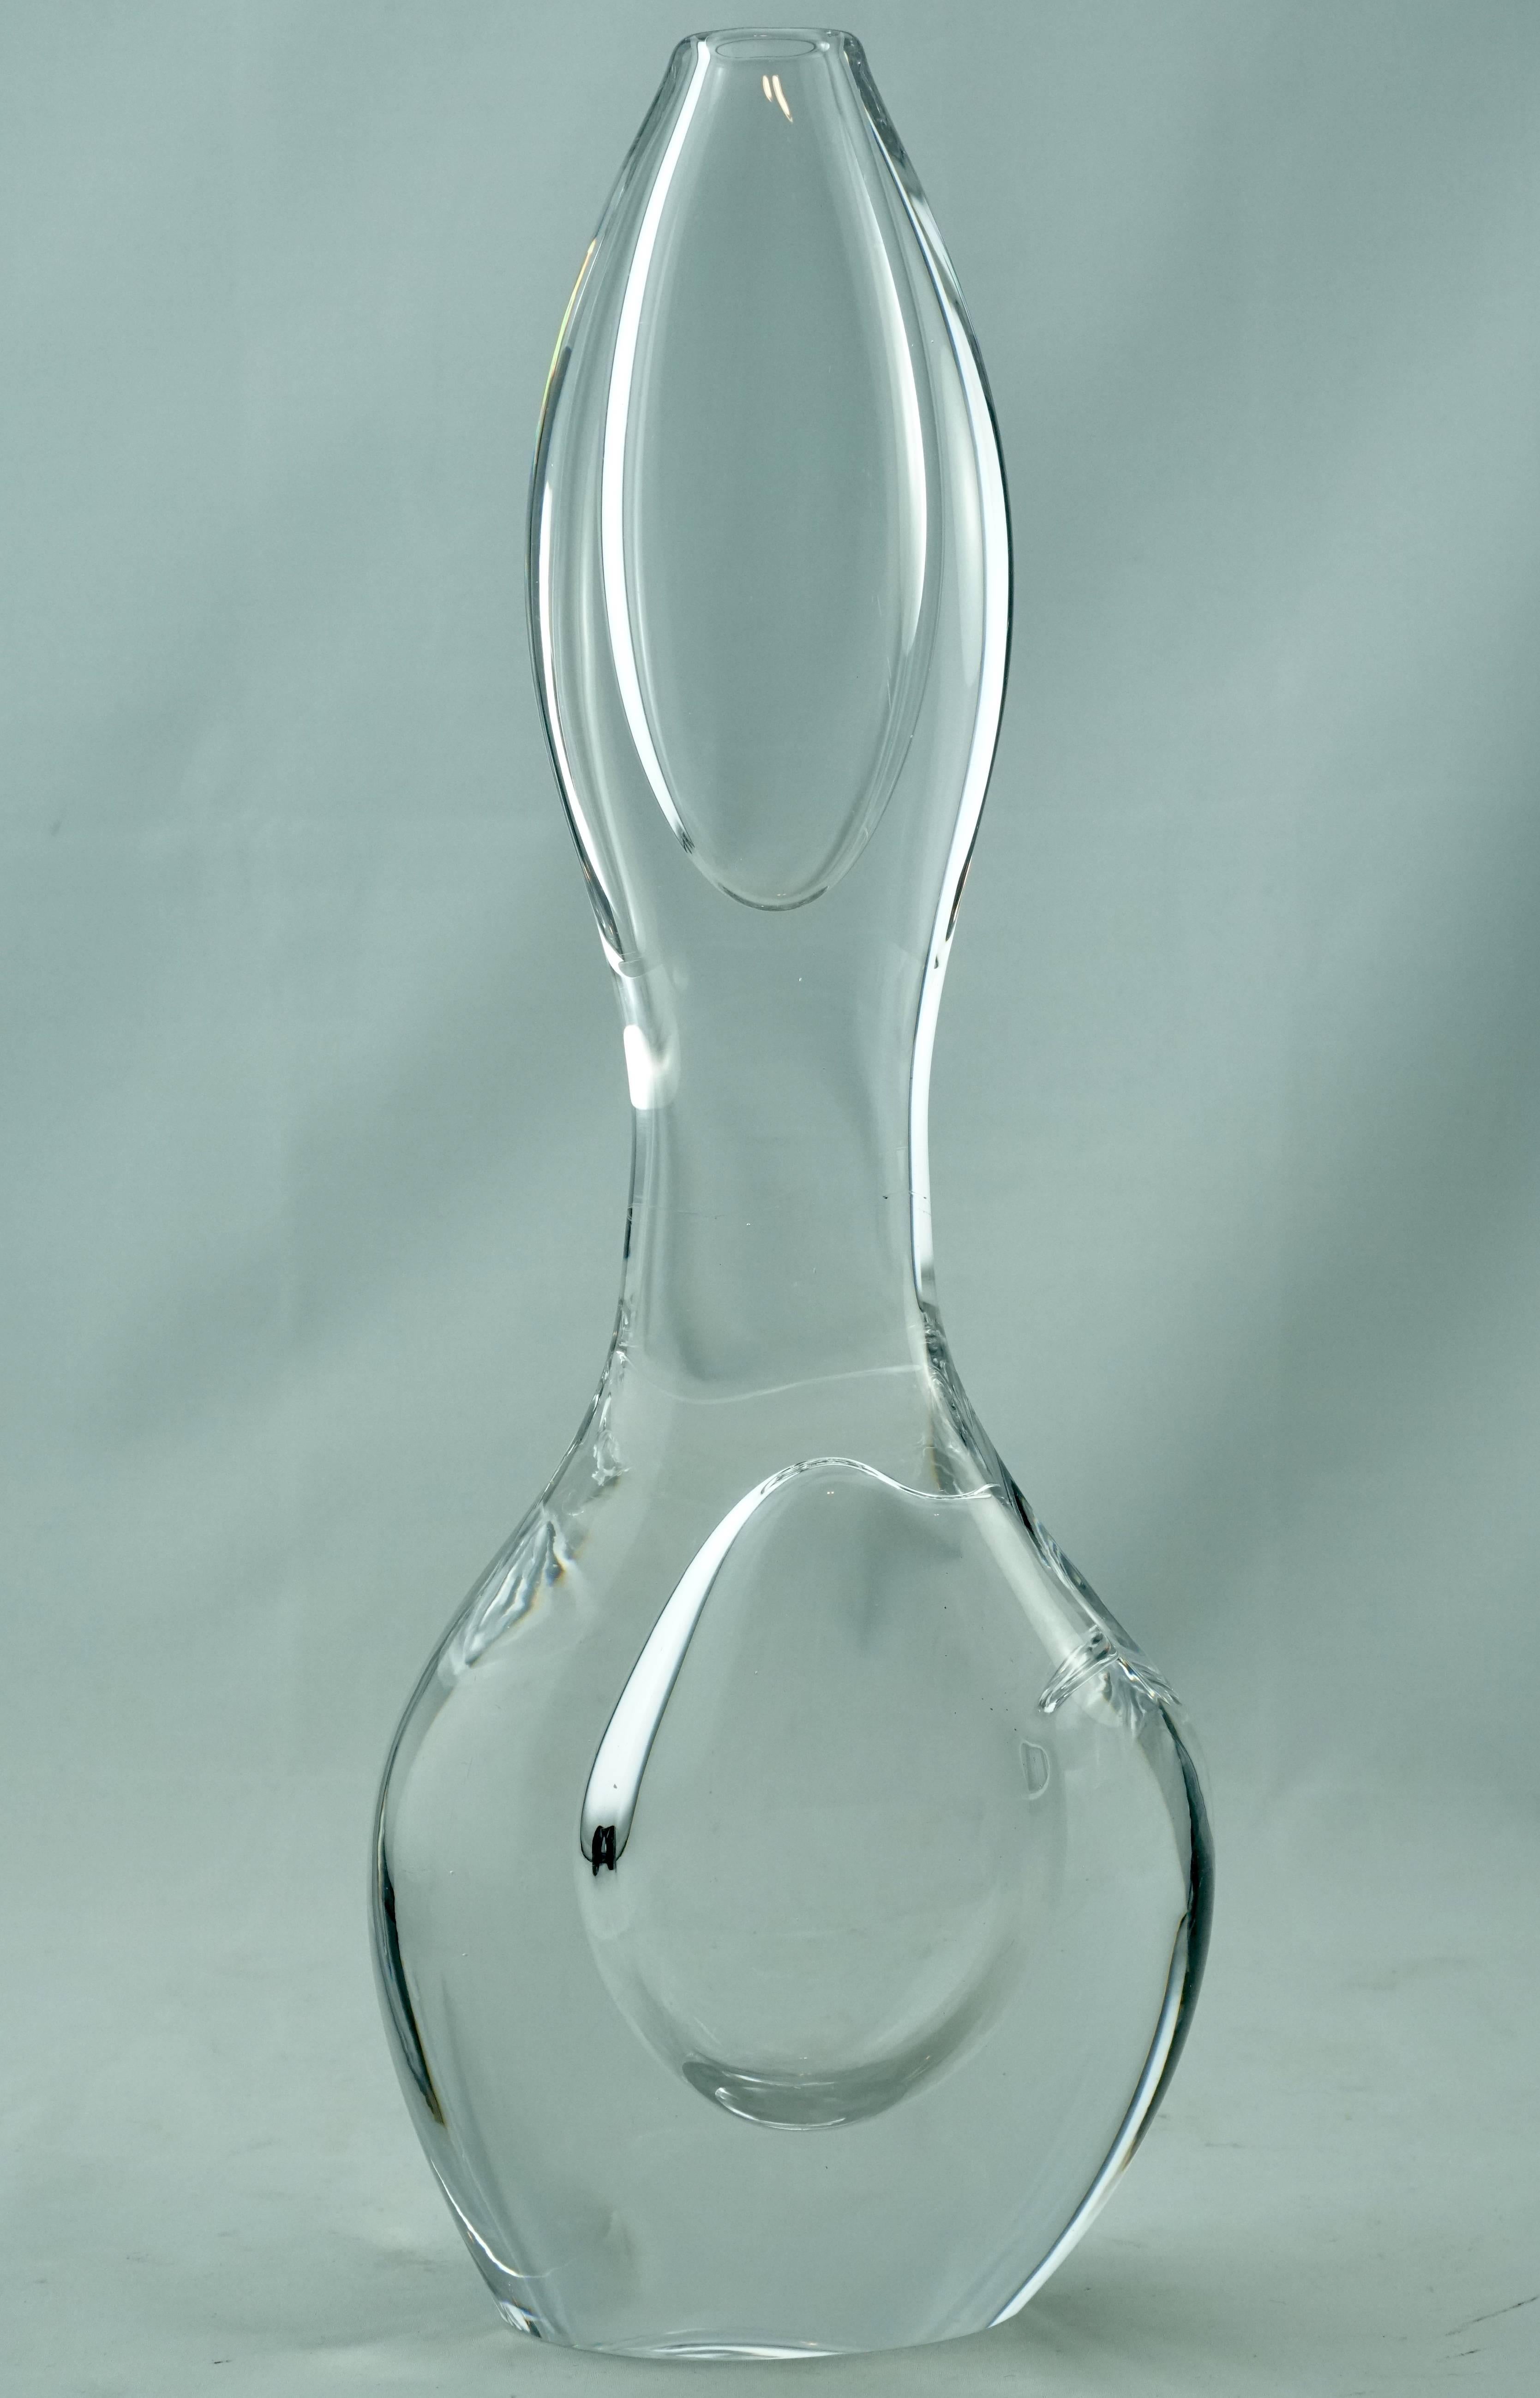 Vicke Lindstrand glass vase by Kosta Boda at Studio Schalling, circa 1950. Orchid vase with two recesses for different flower arrangements. Very heavy glass.

Signed: Kosta/ LH/ 1483

Measure: Height 13.25 inches (33.7 cm) 
Width 4.75